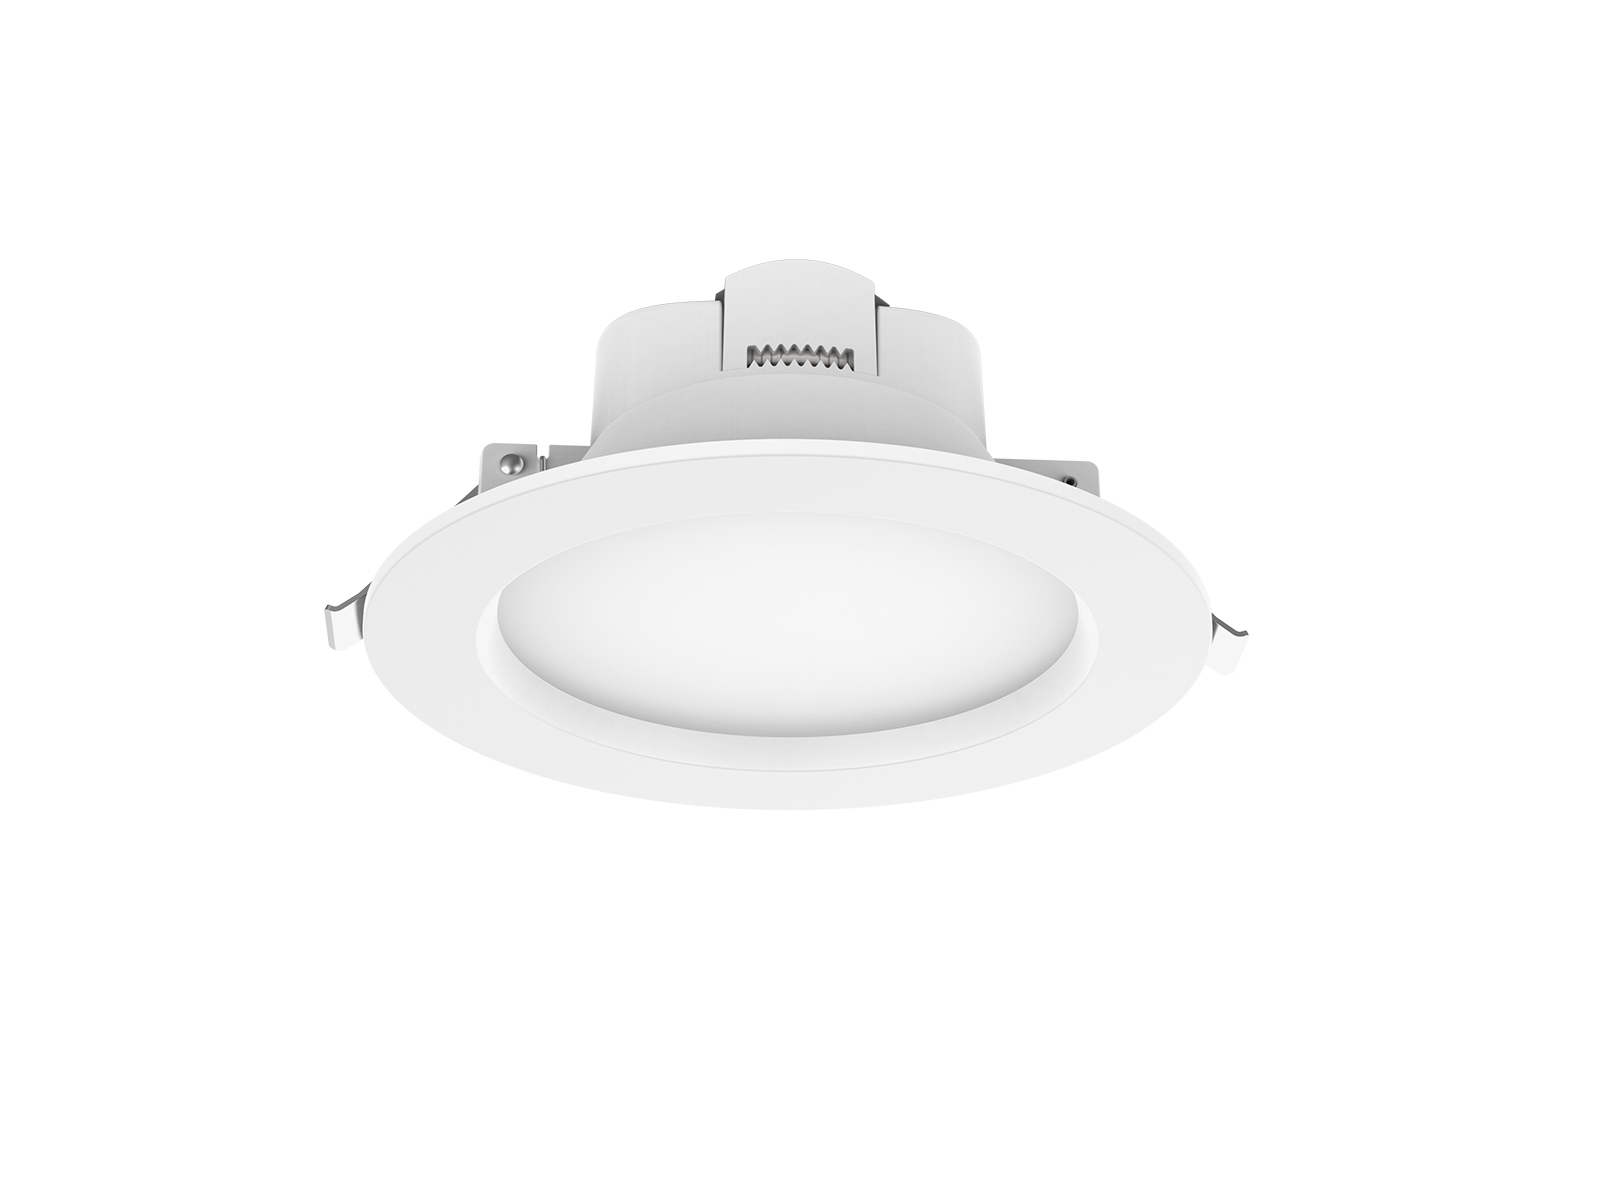 Dimmable downlight led